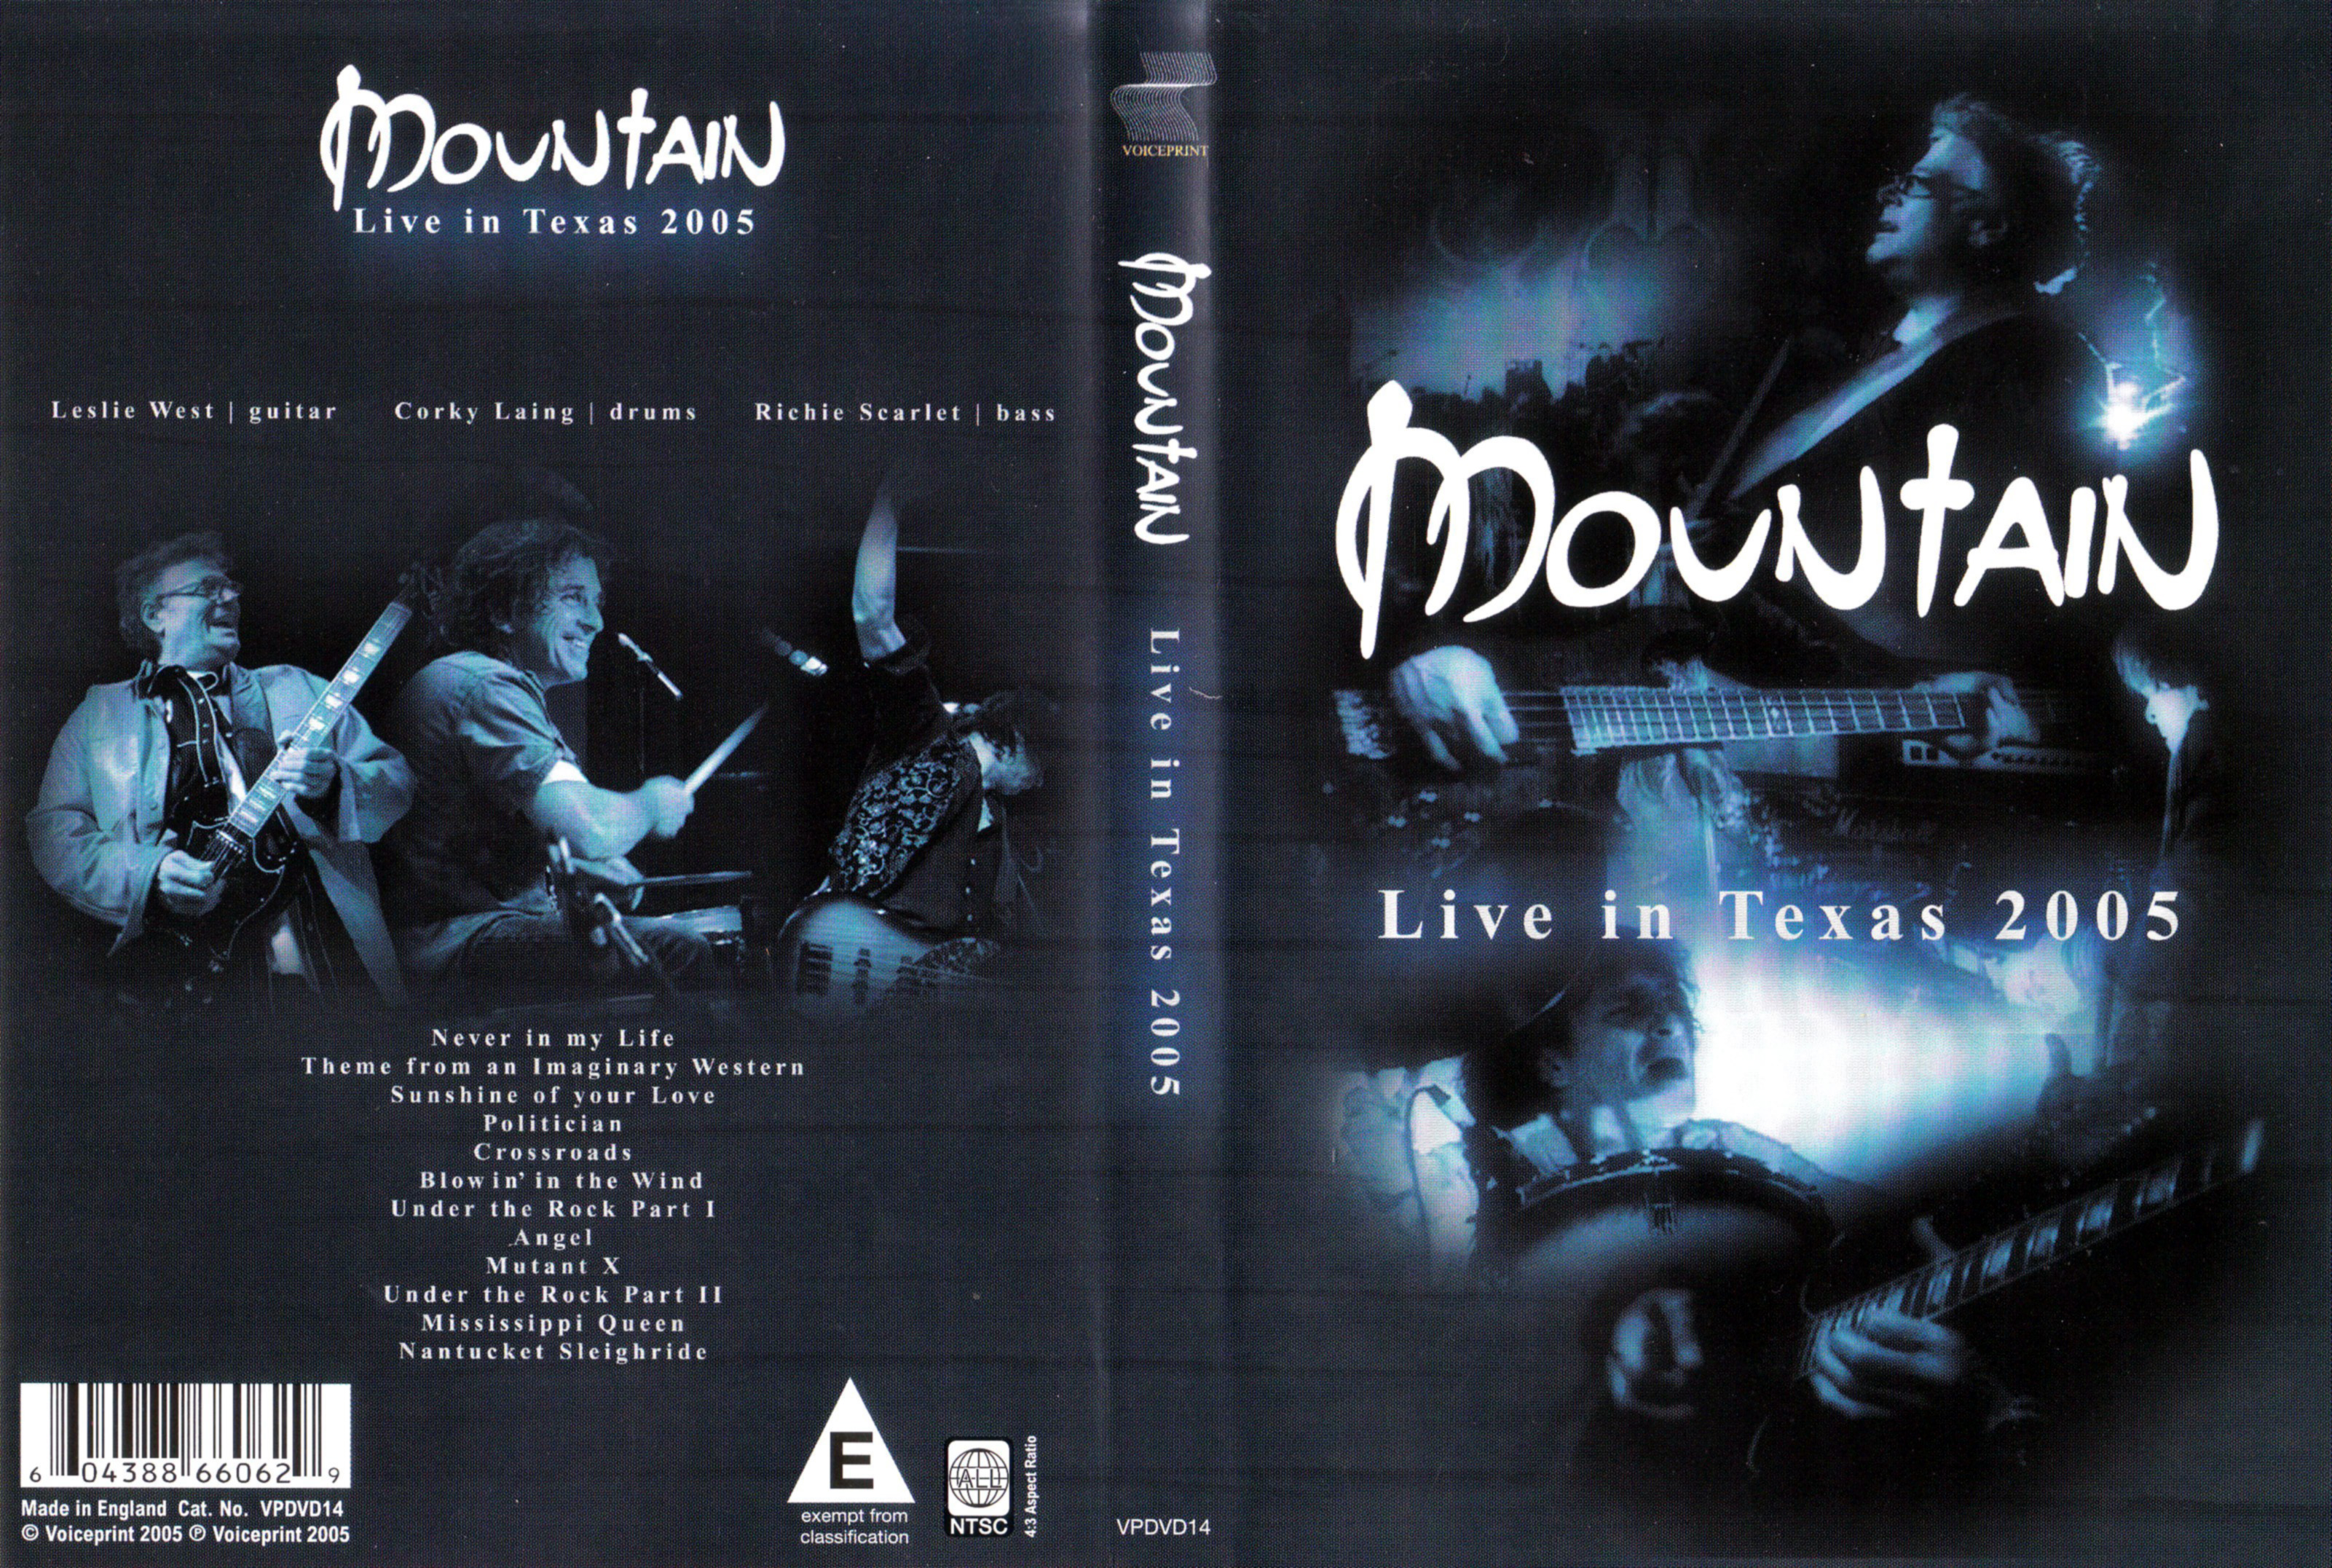 Jaquette DVD Mountain Live in Texas 2005